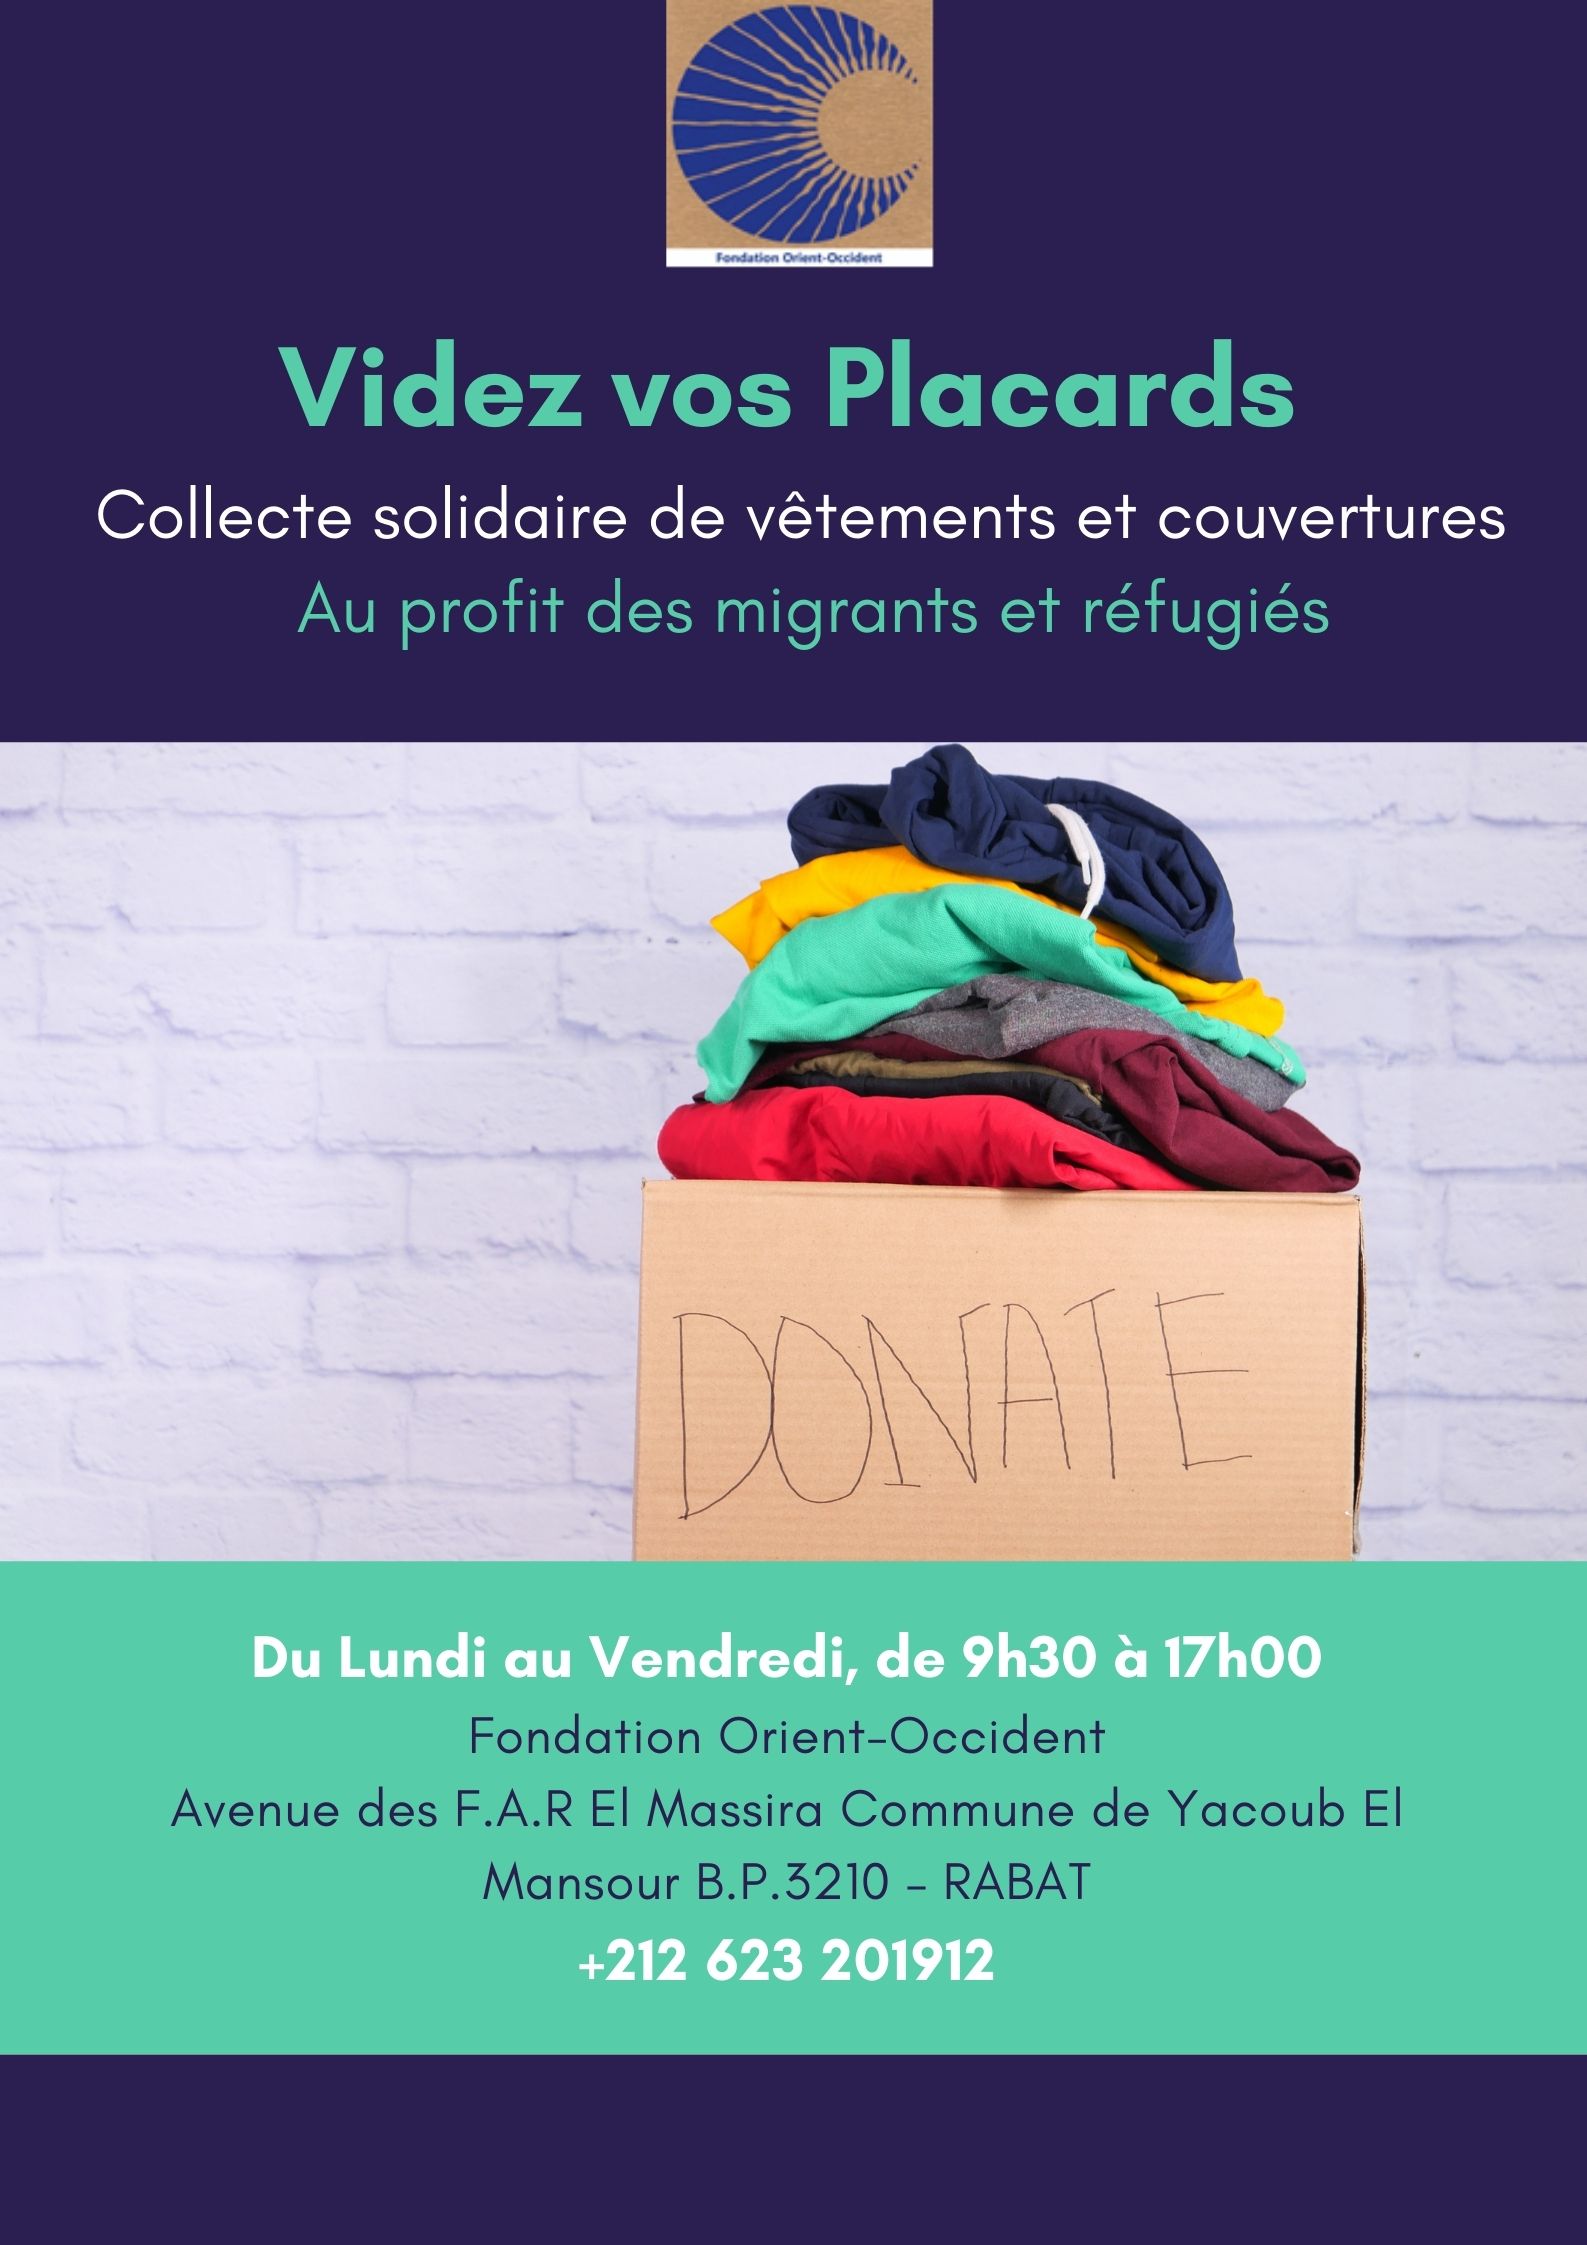 Clothing and blankets donation welcome at the Fondation Orient-Occident